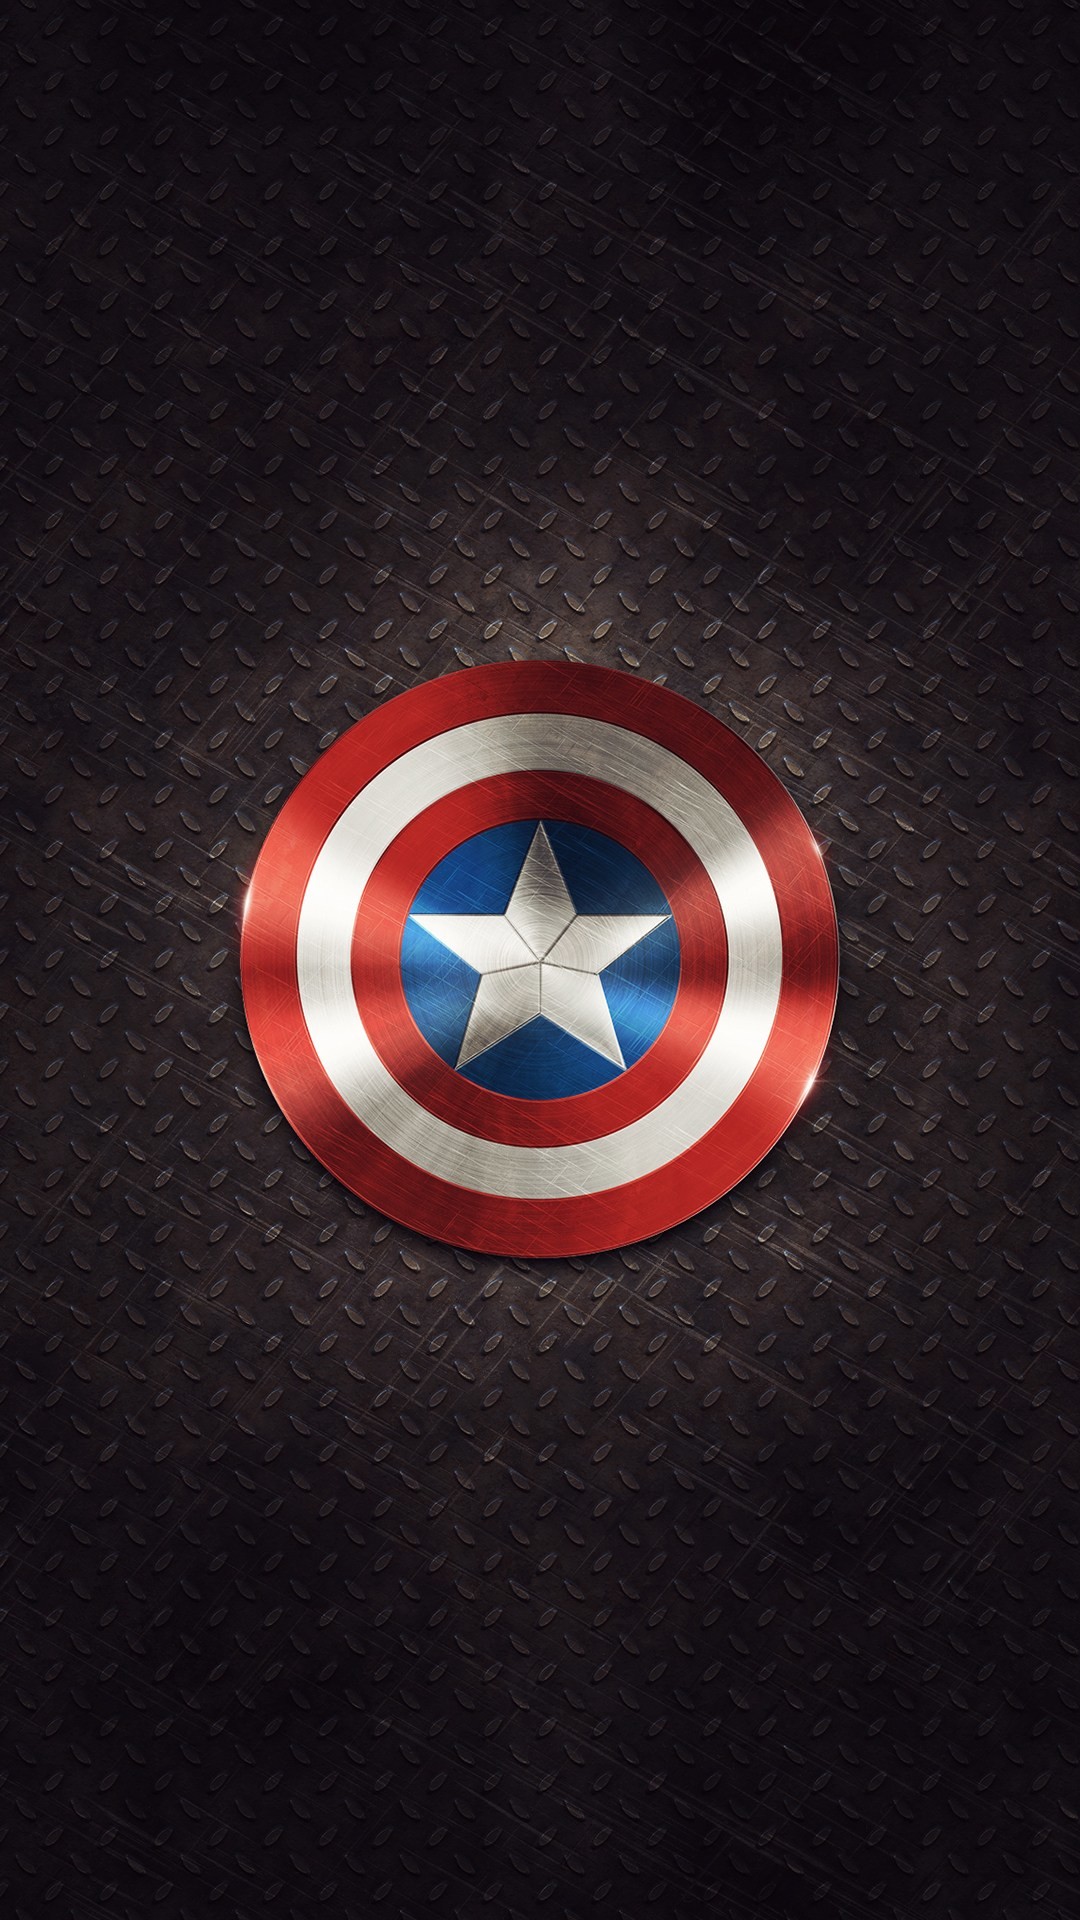 1080x1920 Captain America Shield Android Wallpaper Free